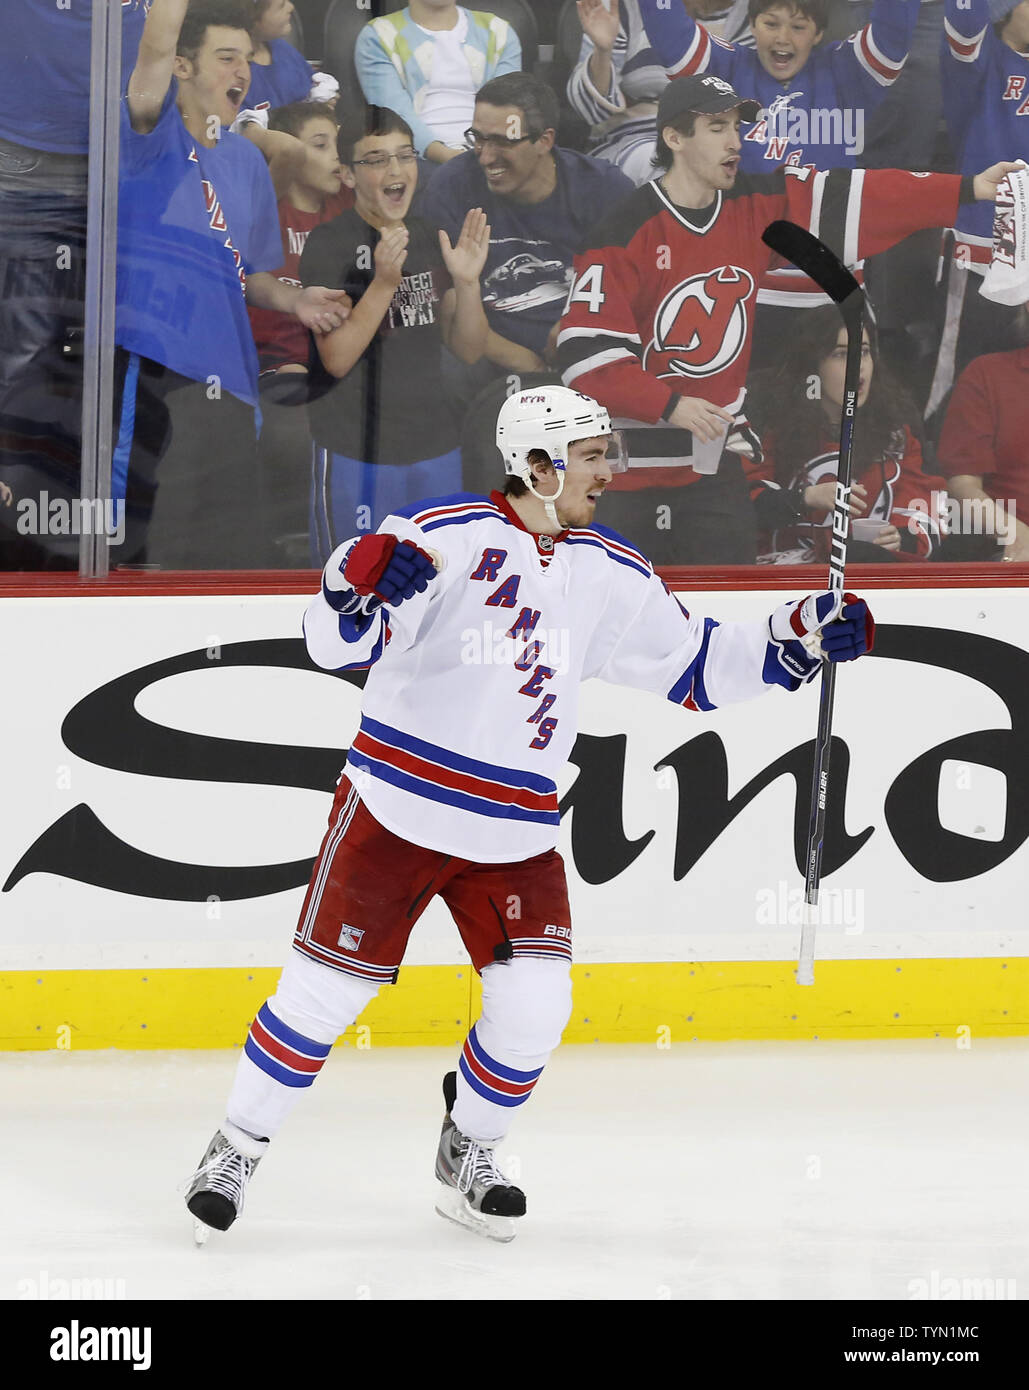 New York Rangers Chris Kreider reacts after he scores a goal in the third  period against the New Jersey Devils in game 3 in the Eastern Conference  Finals of the Stanley Cup